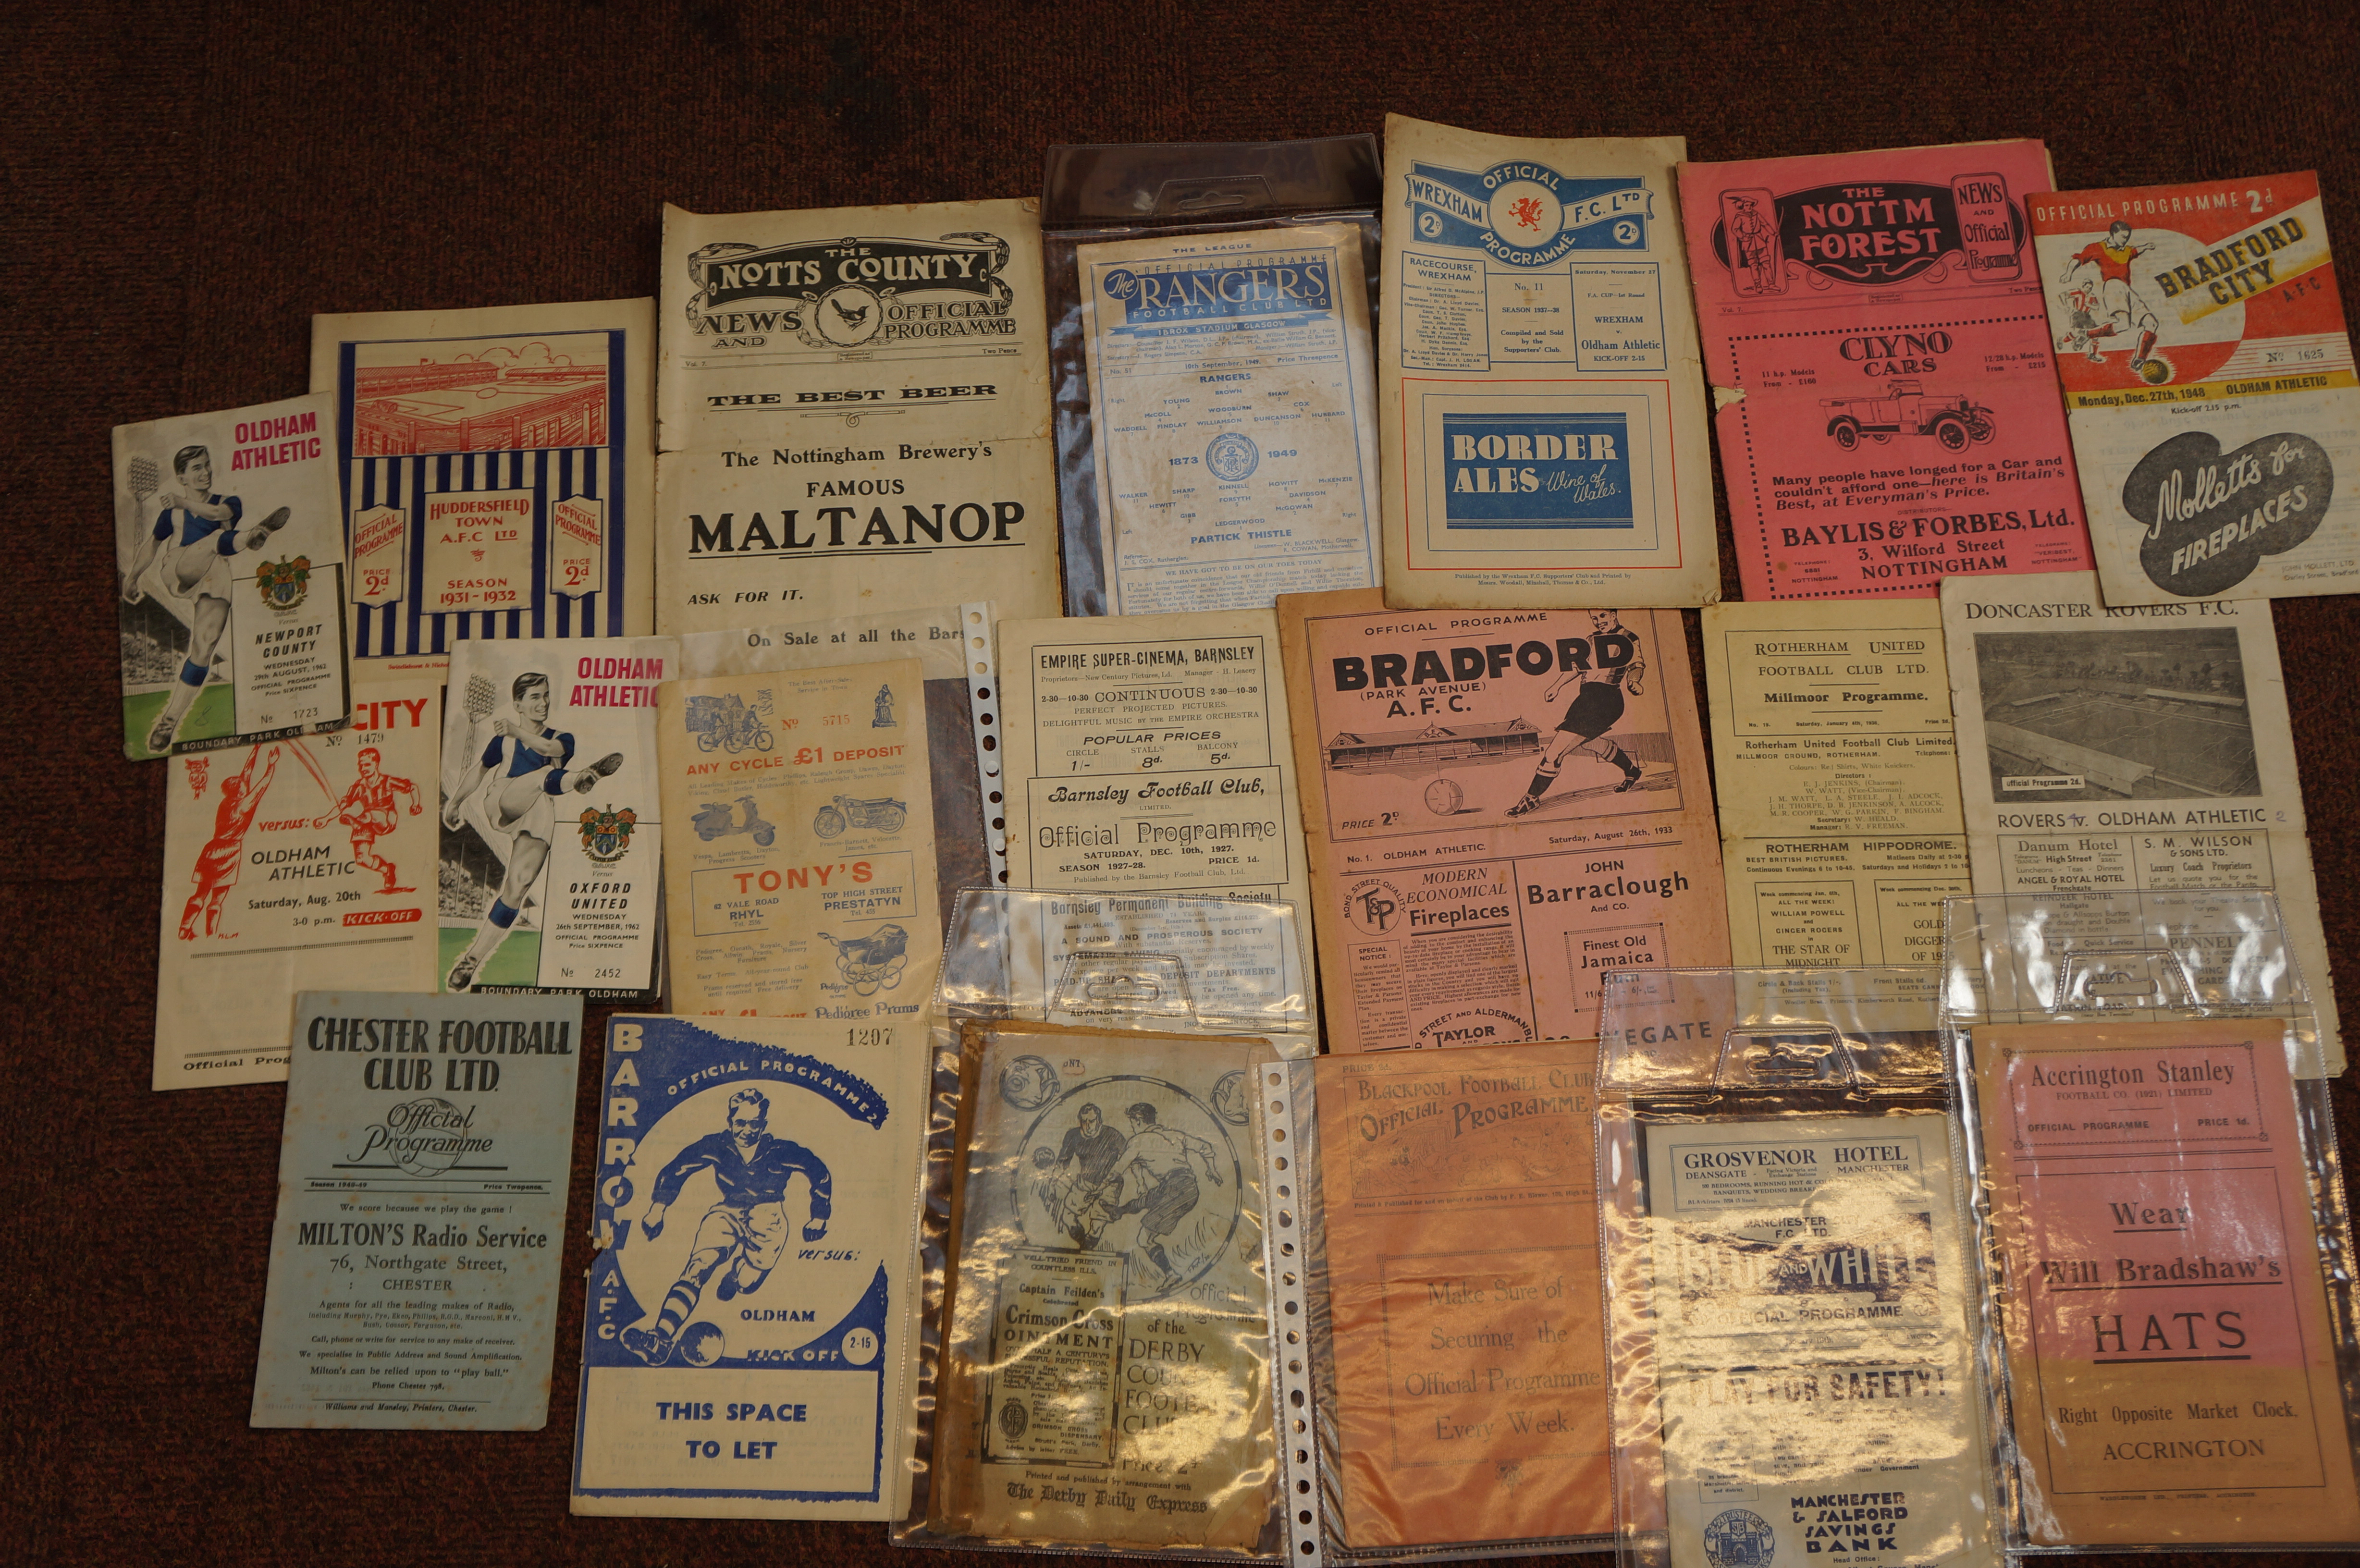 Good collection of early football programs - some